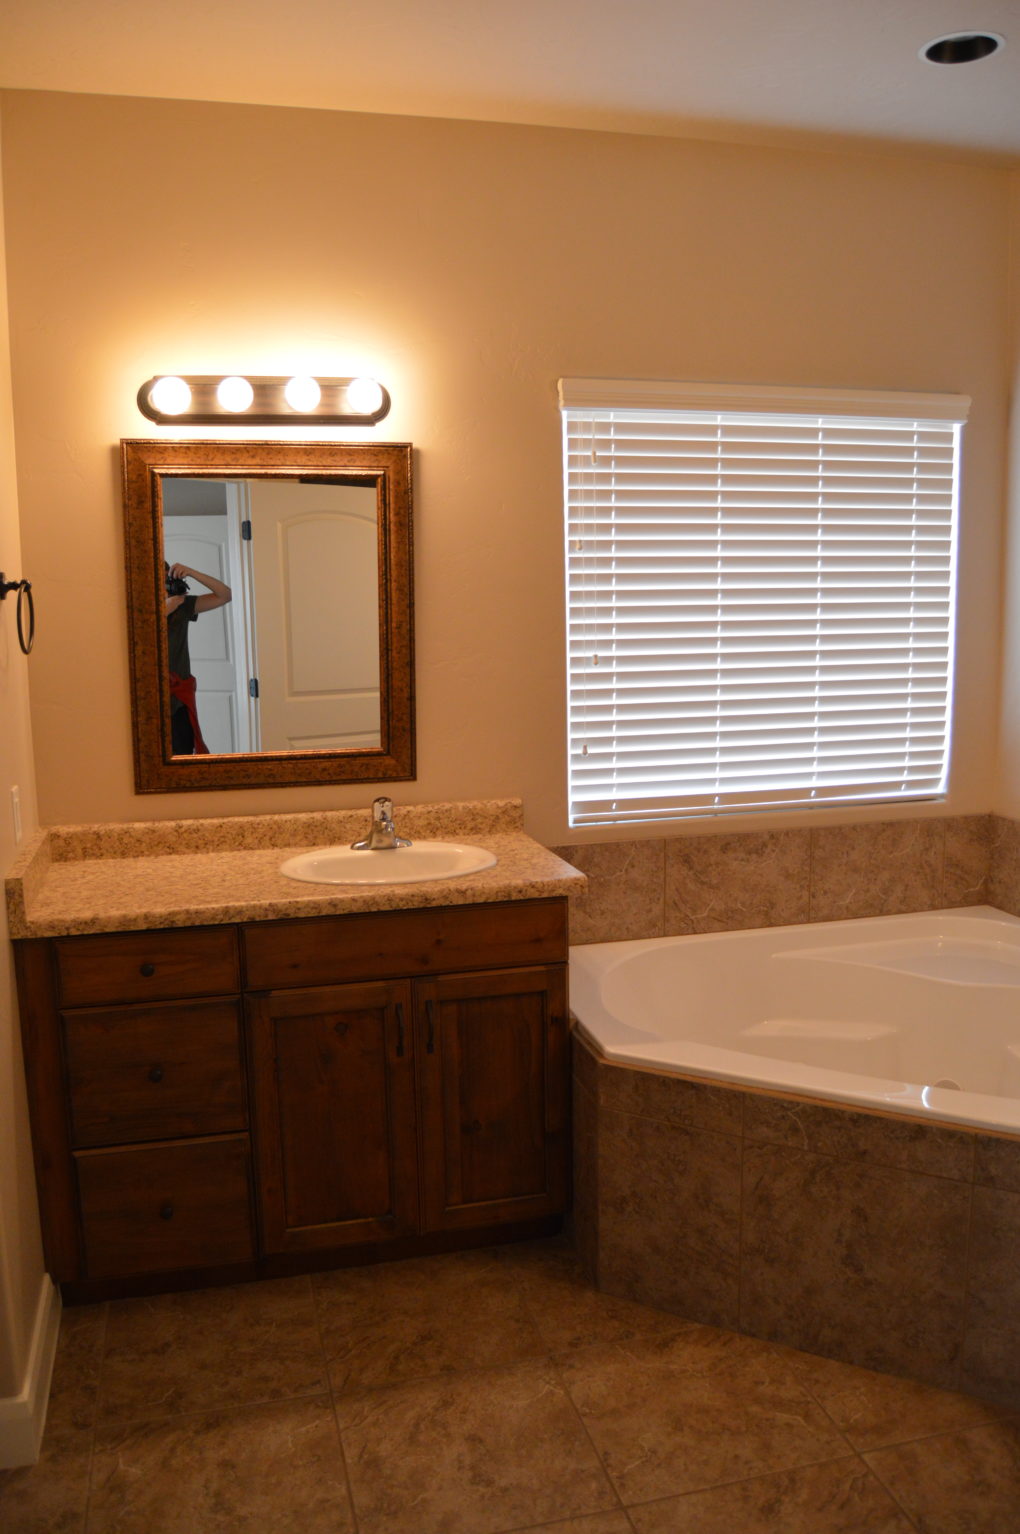 Our new house in St George, Utah. The master bathroom.